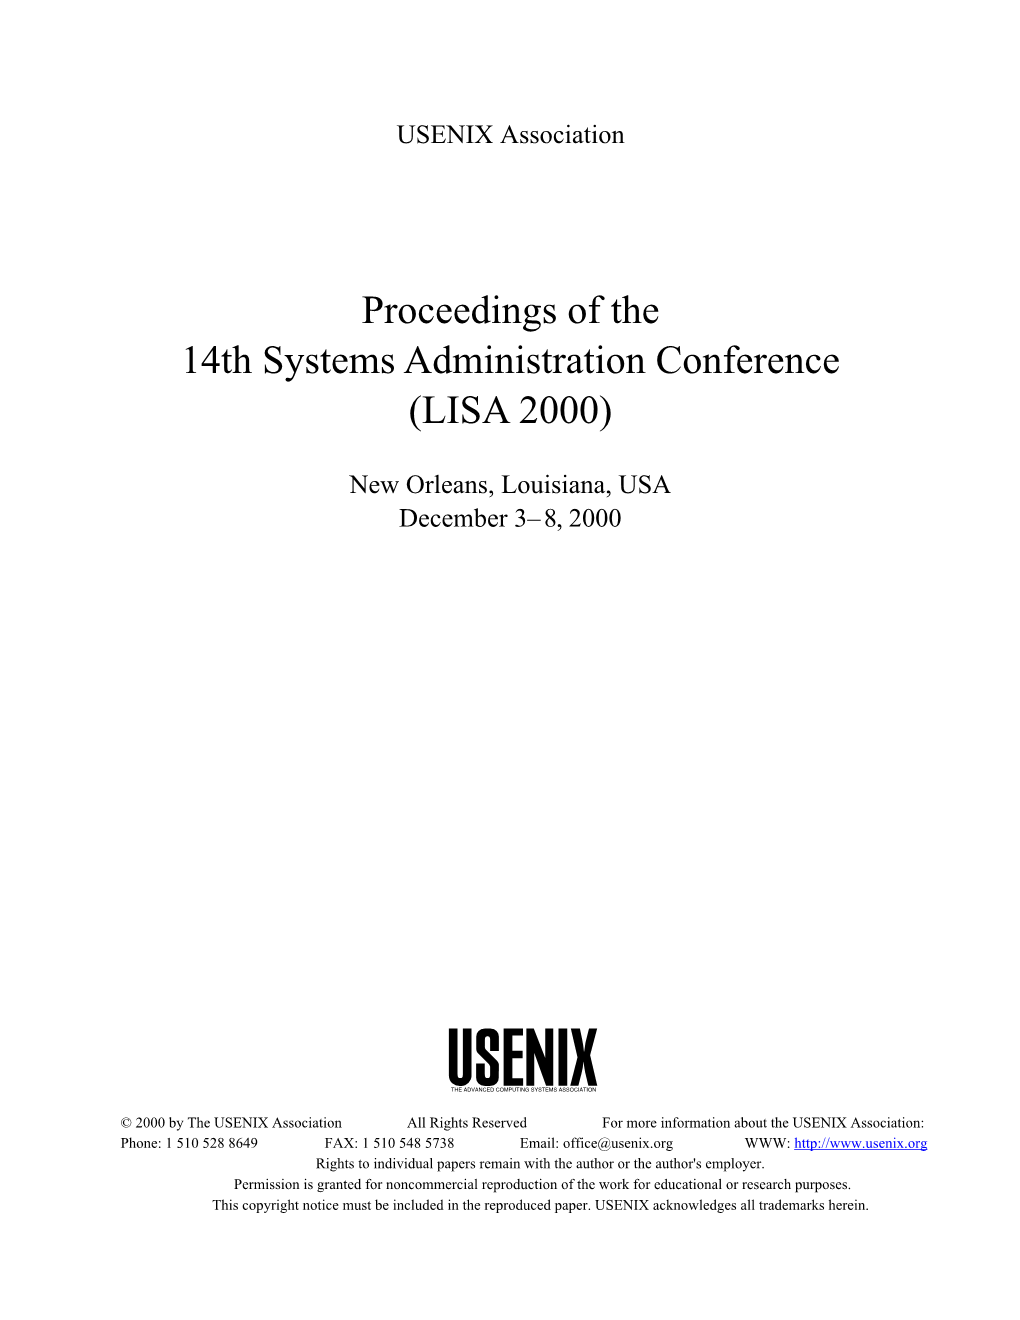 Proceedings of the 14Th Systems Administration Conference (LISA 2000)